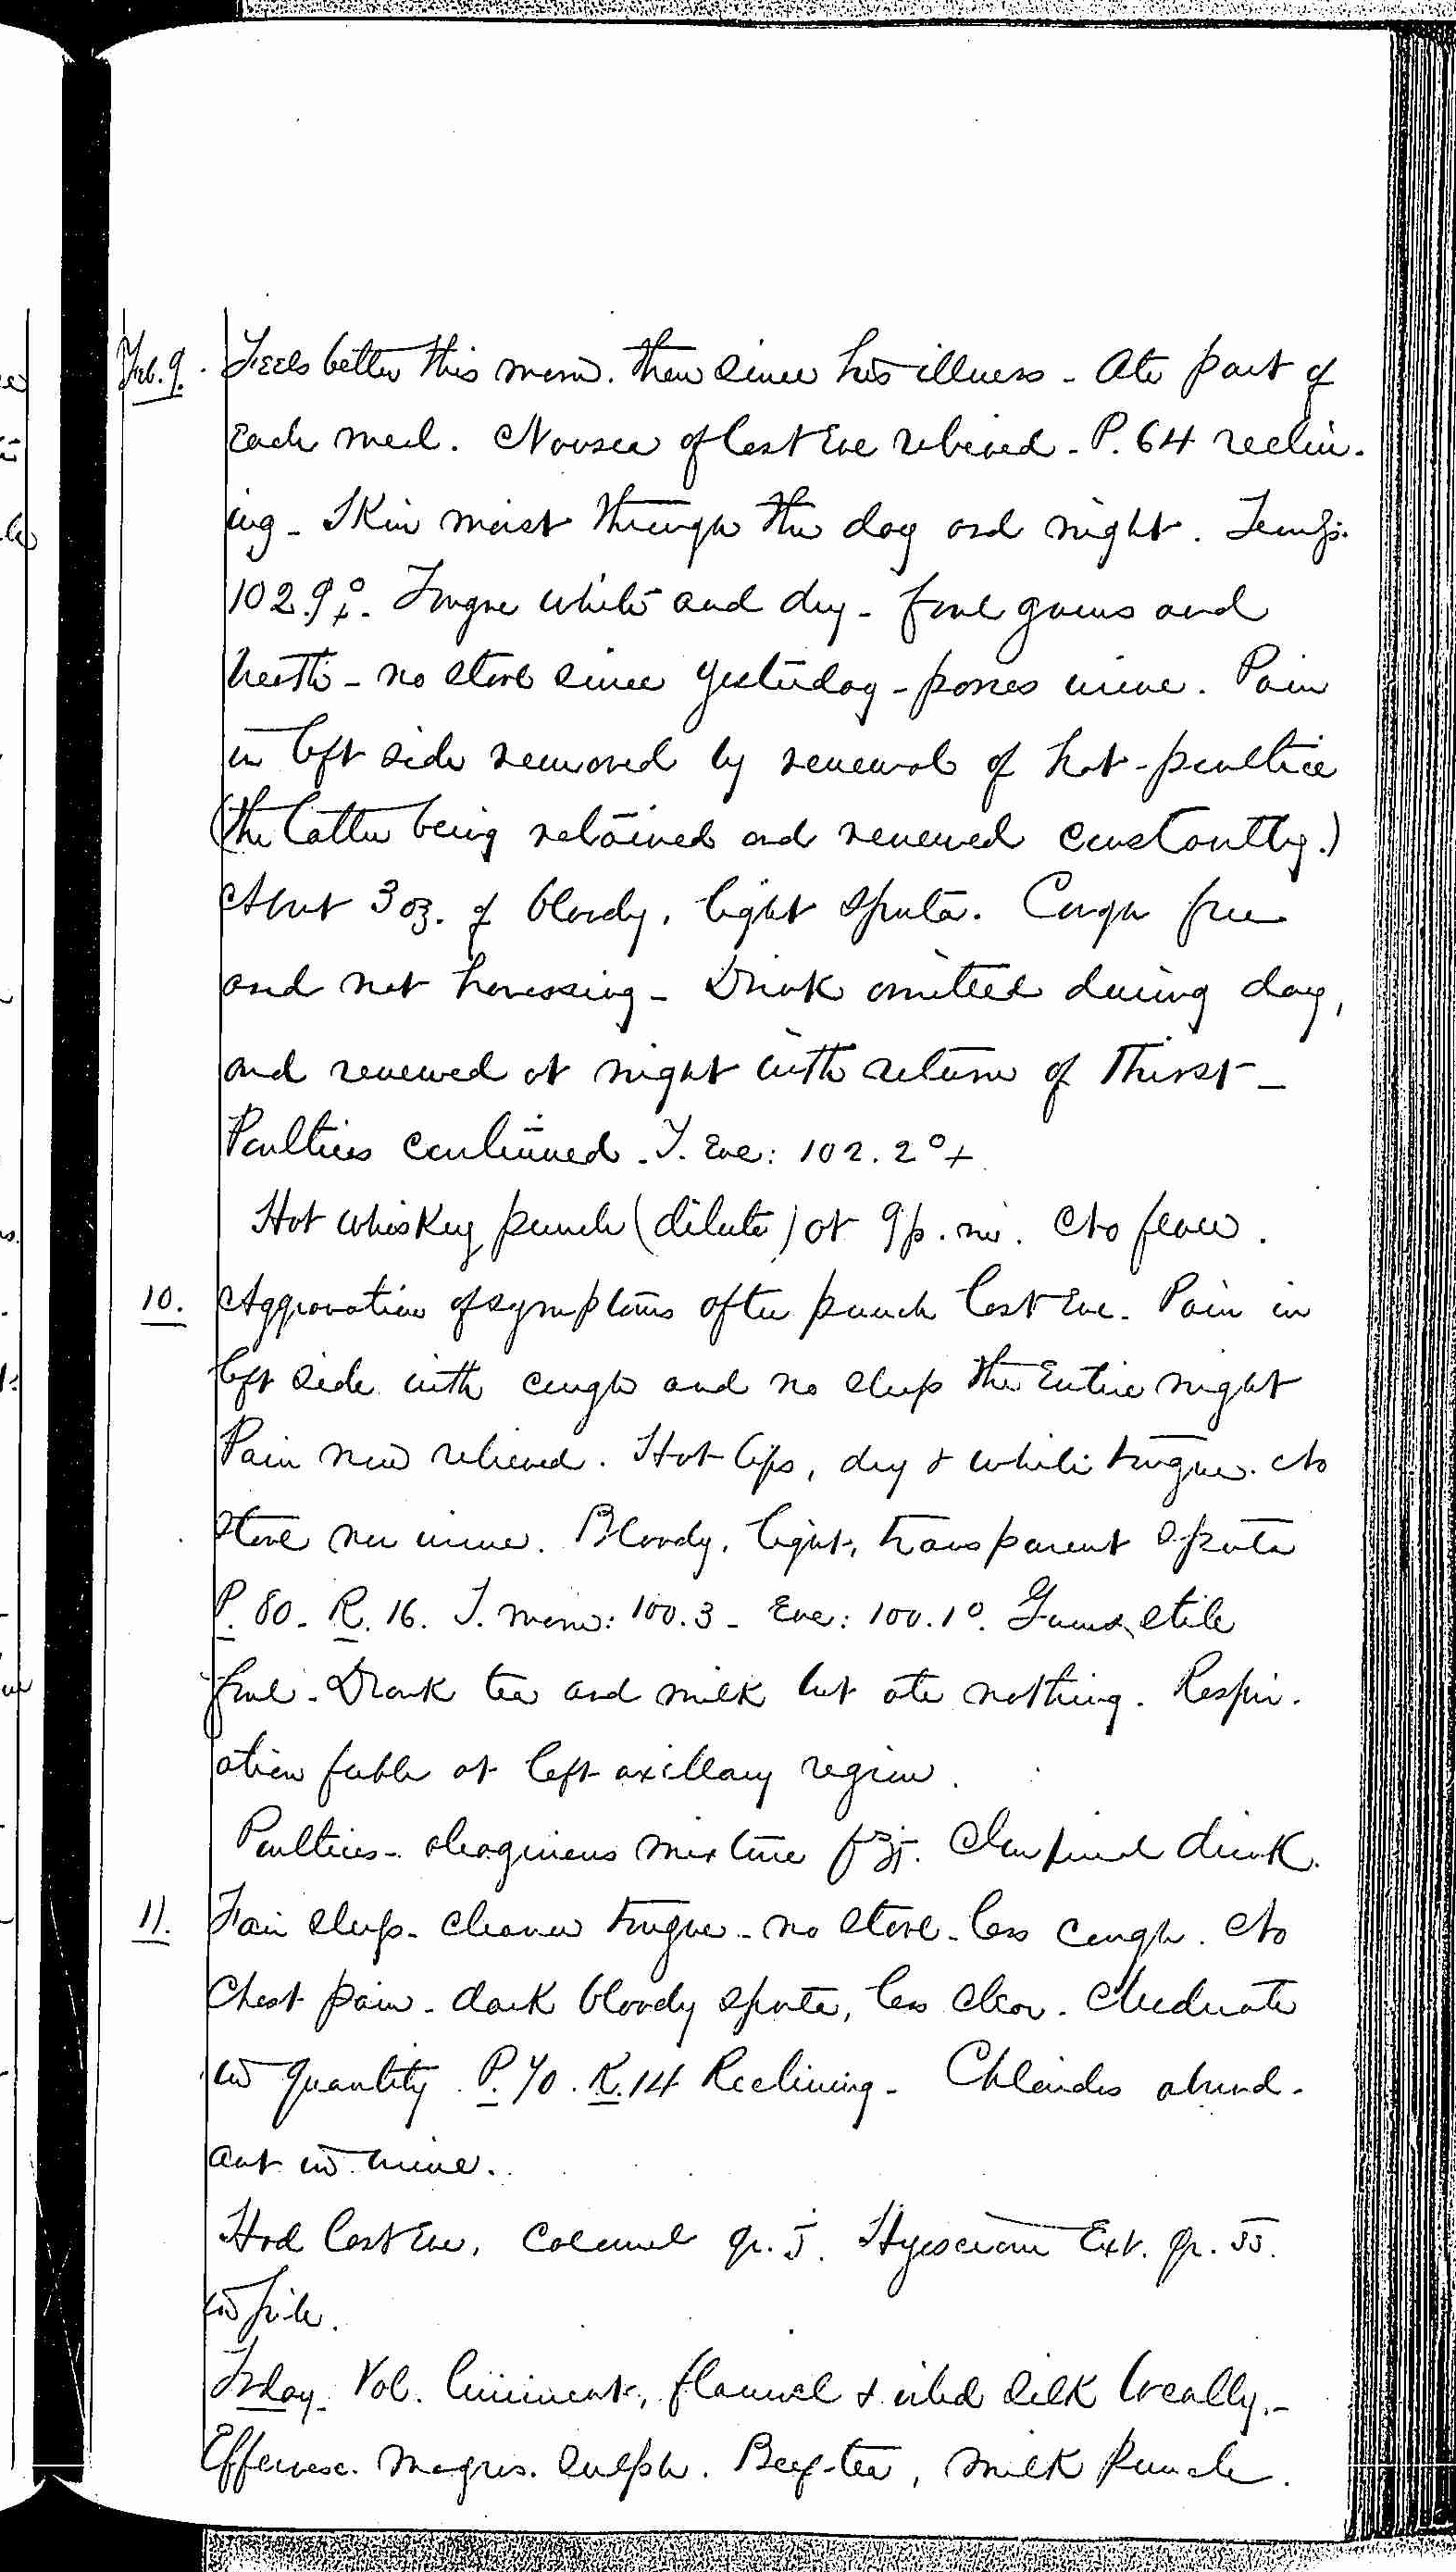 Entry for Theodore C. Waltenberg (page 3 of 4) in the log Hospital Tickets and Case Papers - Naval Hospital - Washington, D.C. - 1868-69